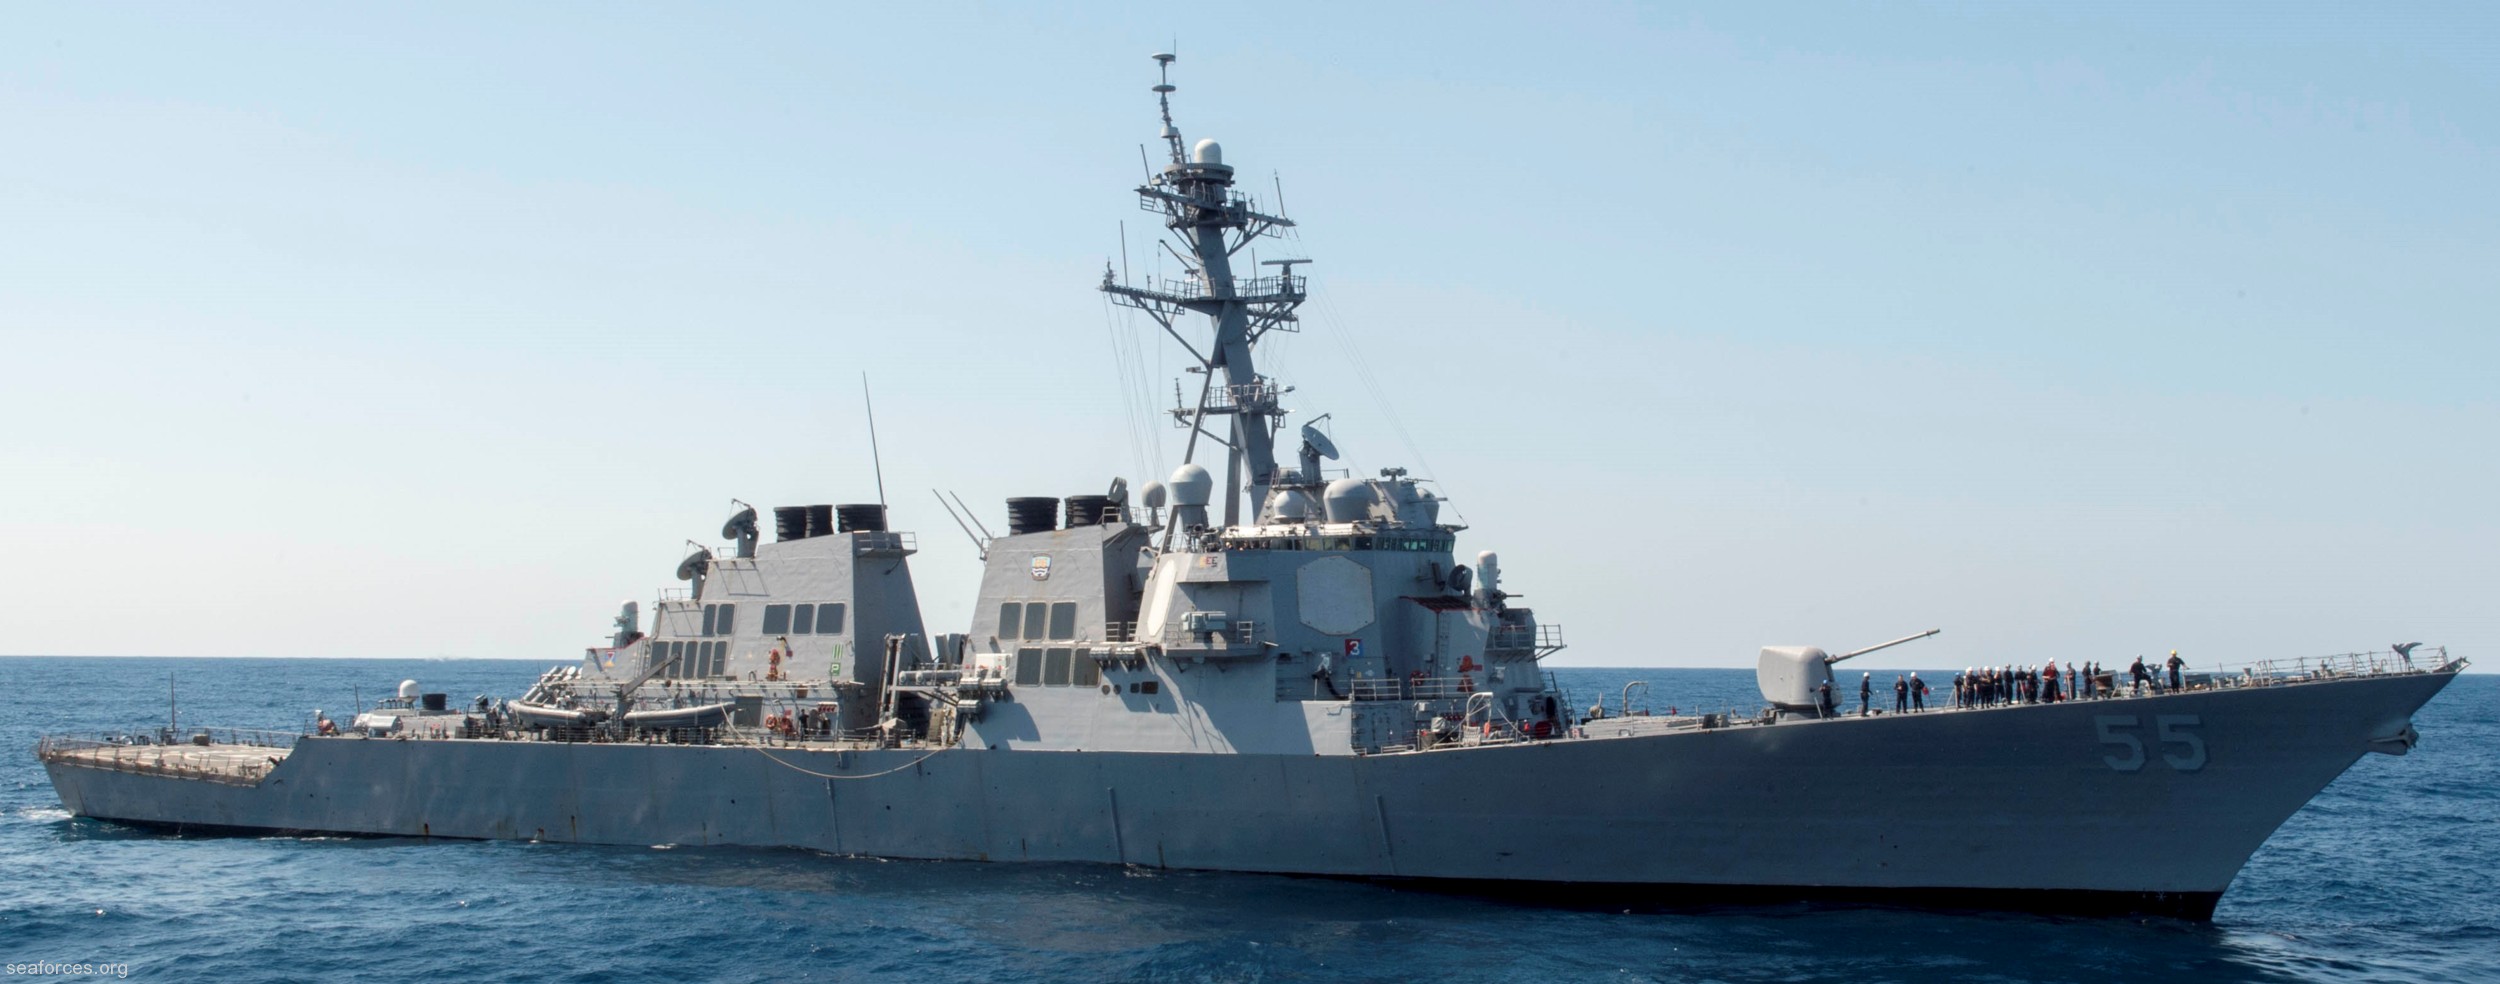 ddg-55 uss stout guided missile destroyer us navy 16 arleigh burke class